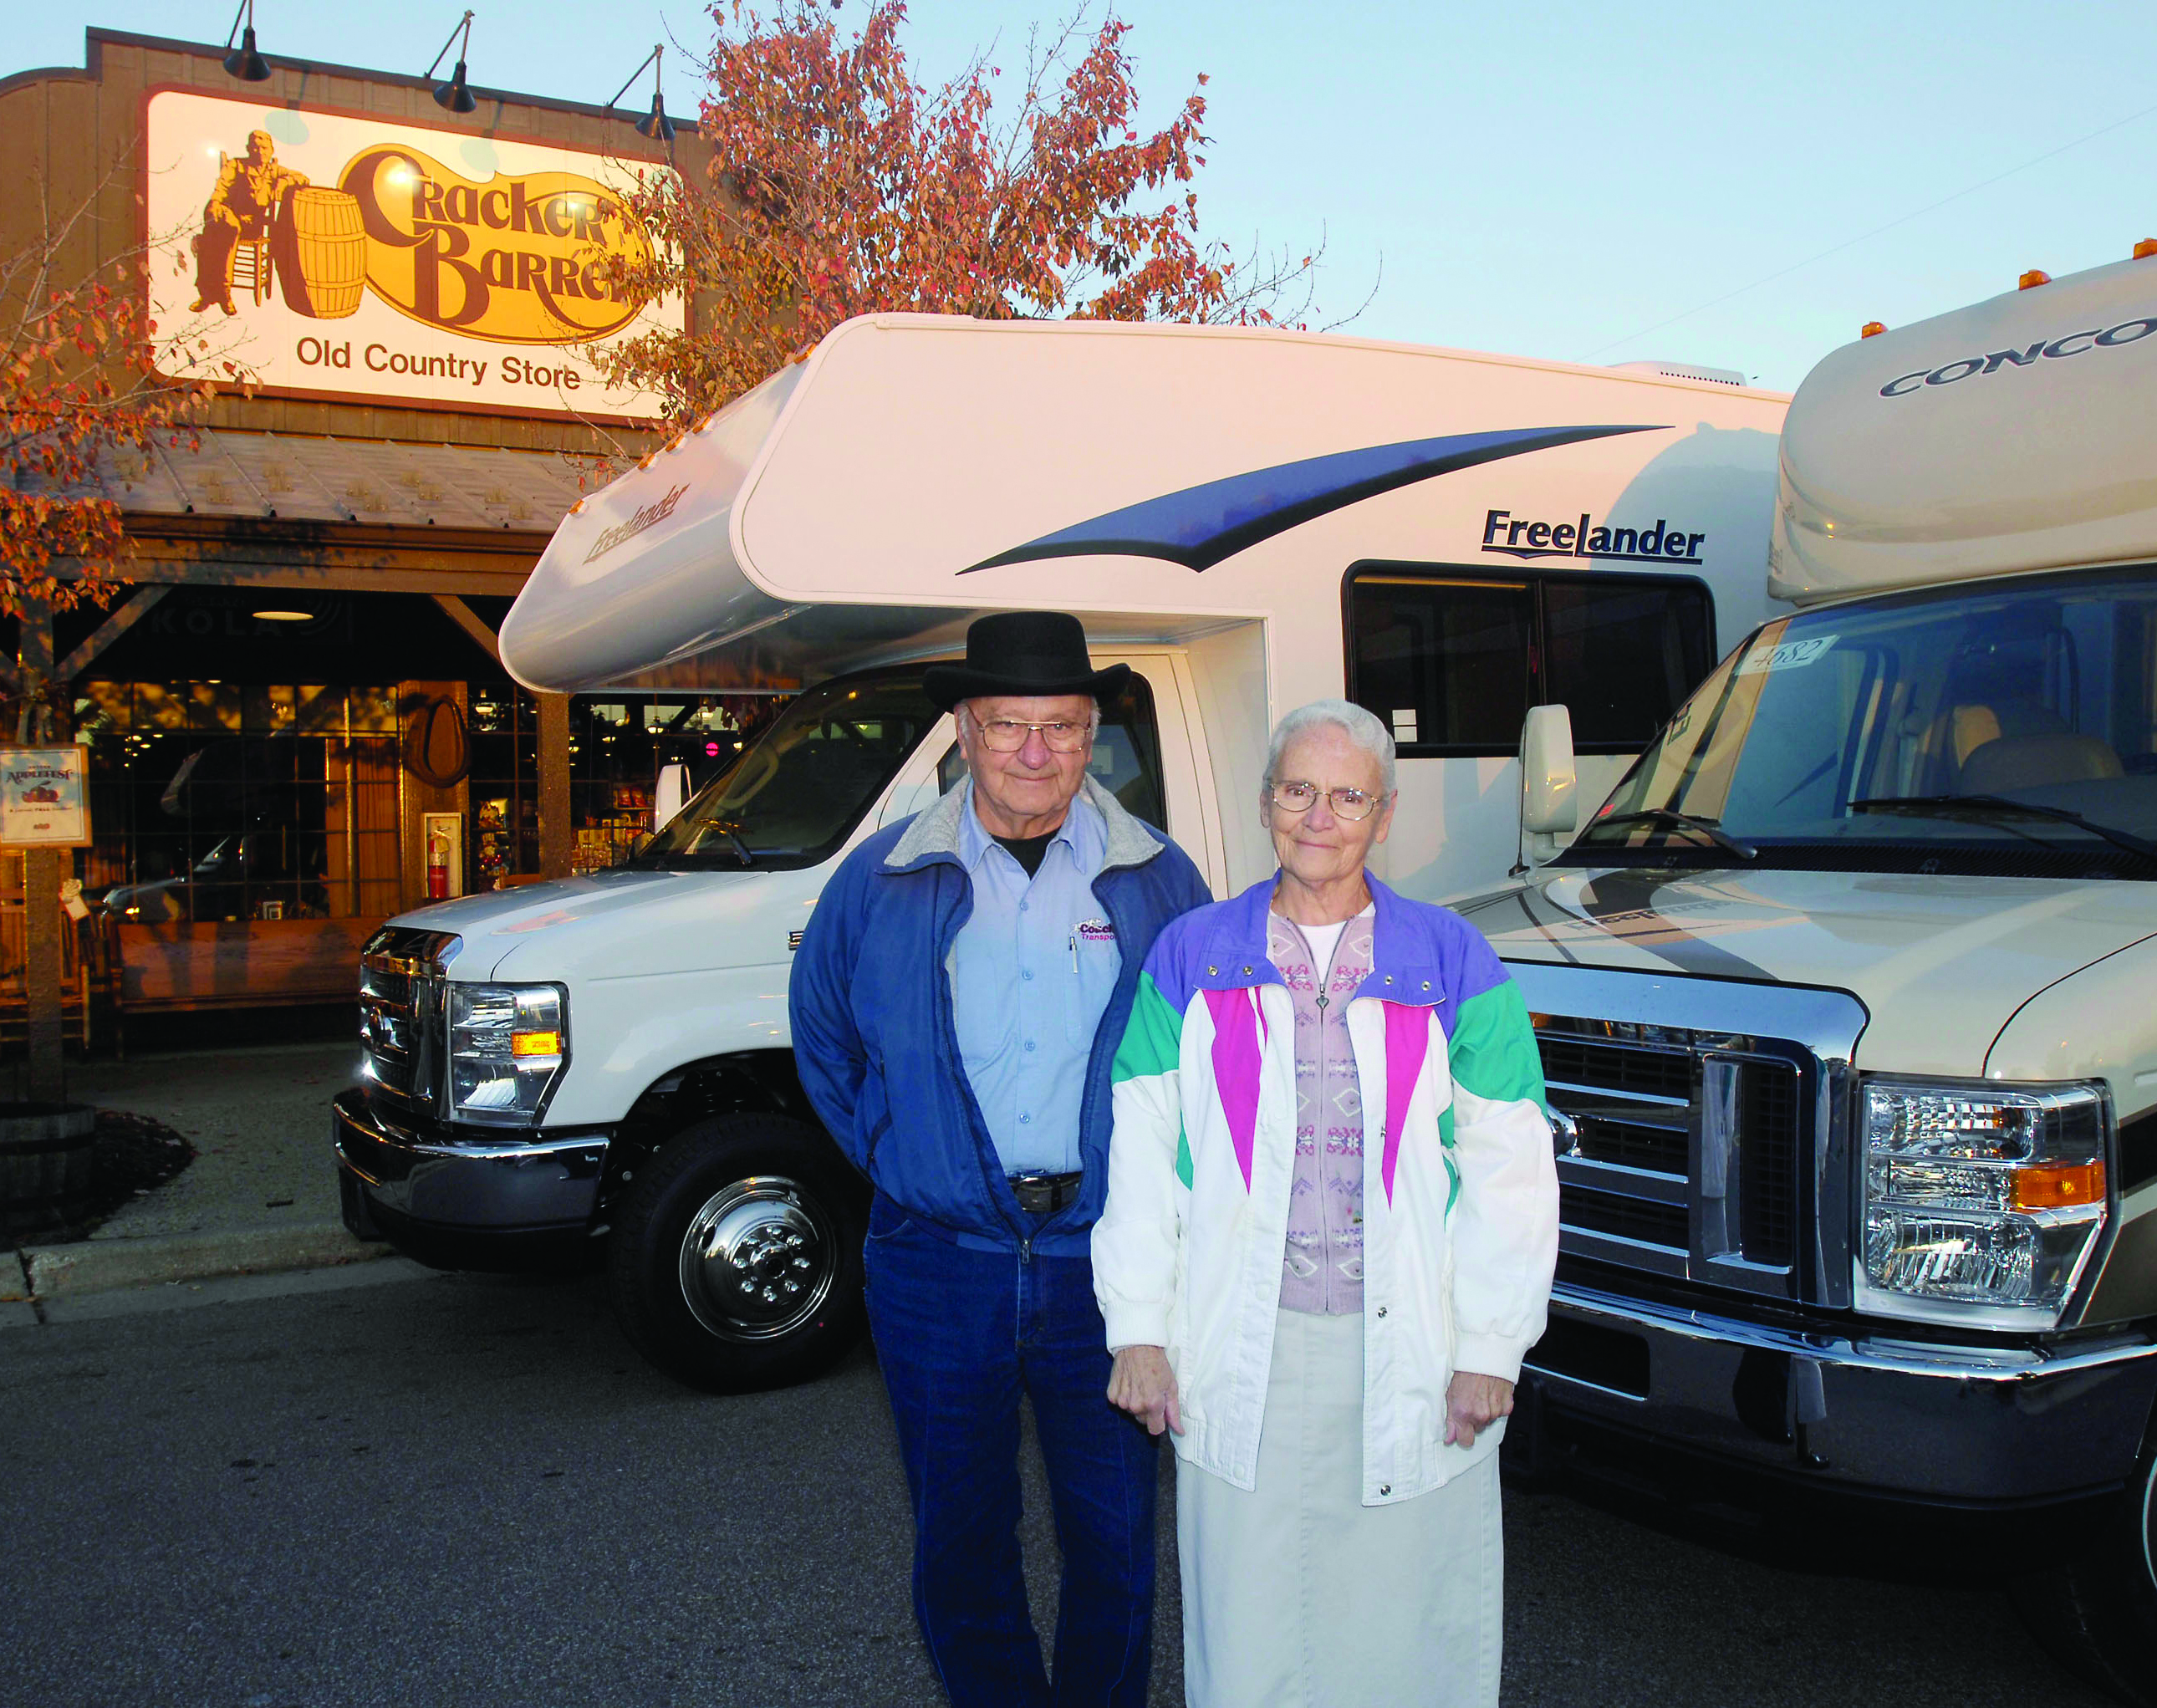 Ray and Wilma Yoder, Cracker Barrel and RV fans (Courtesy of Cracker Barrel)